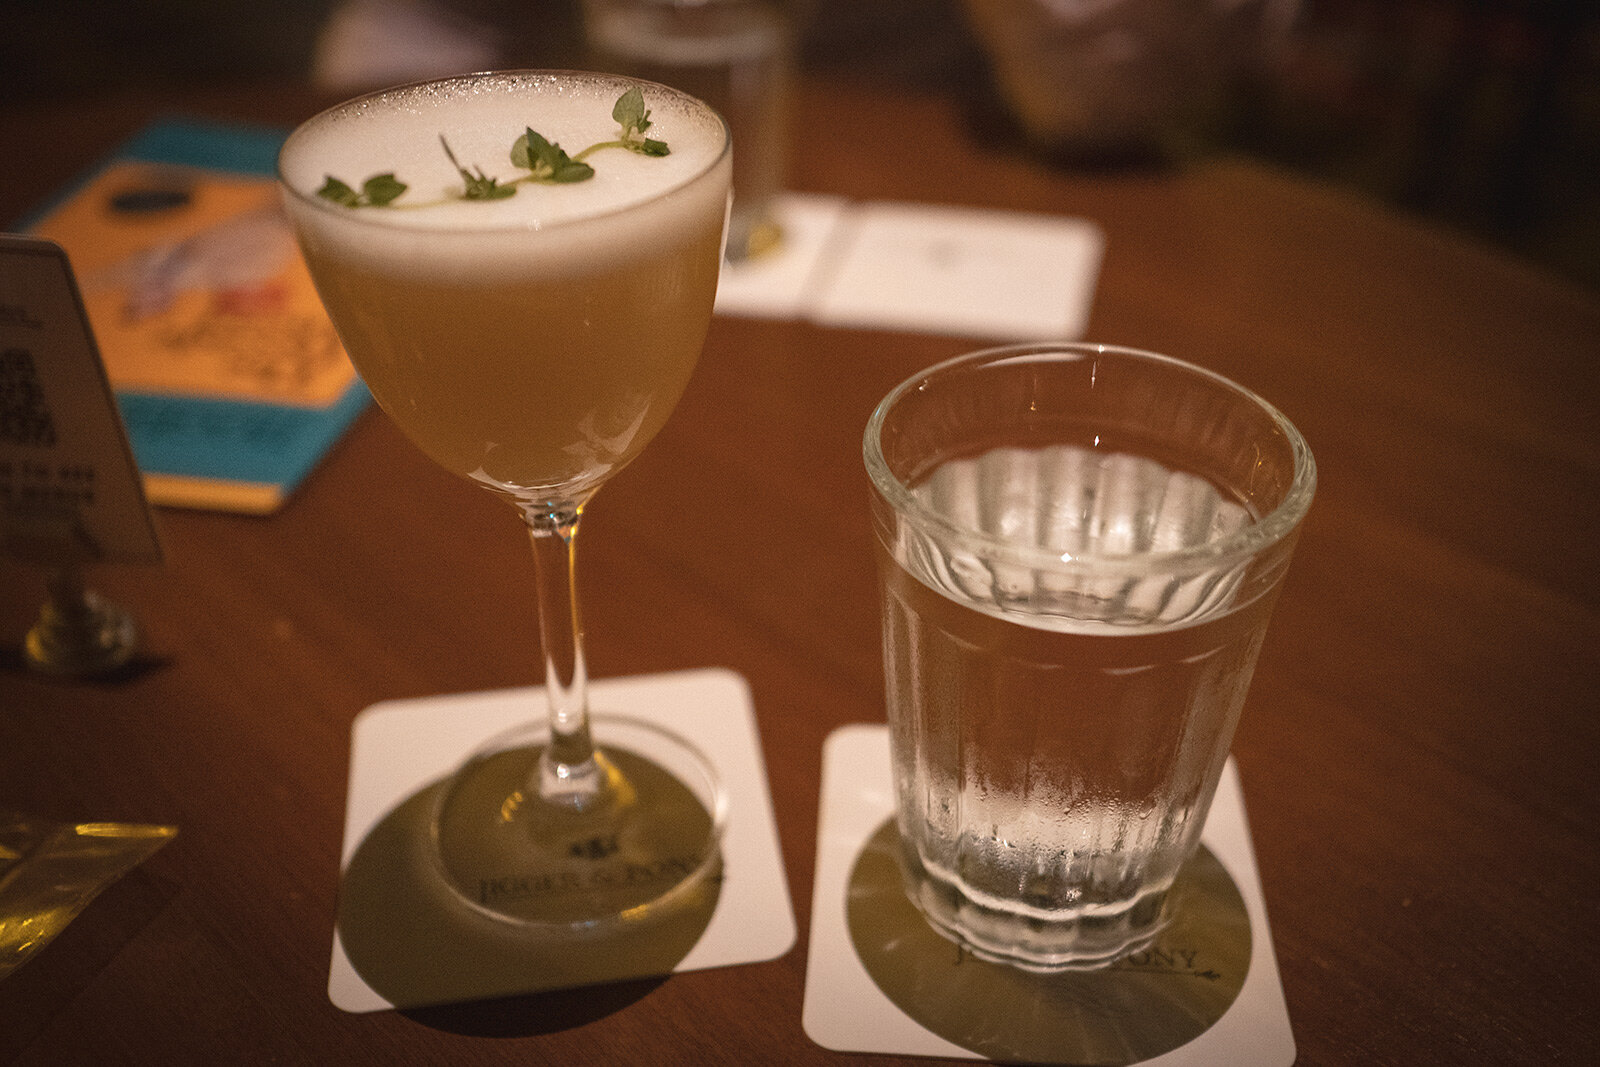 My all-time favorite drink will probably be Jigger &amp; Pony’s Yuzu Whiskey Sour